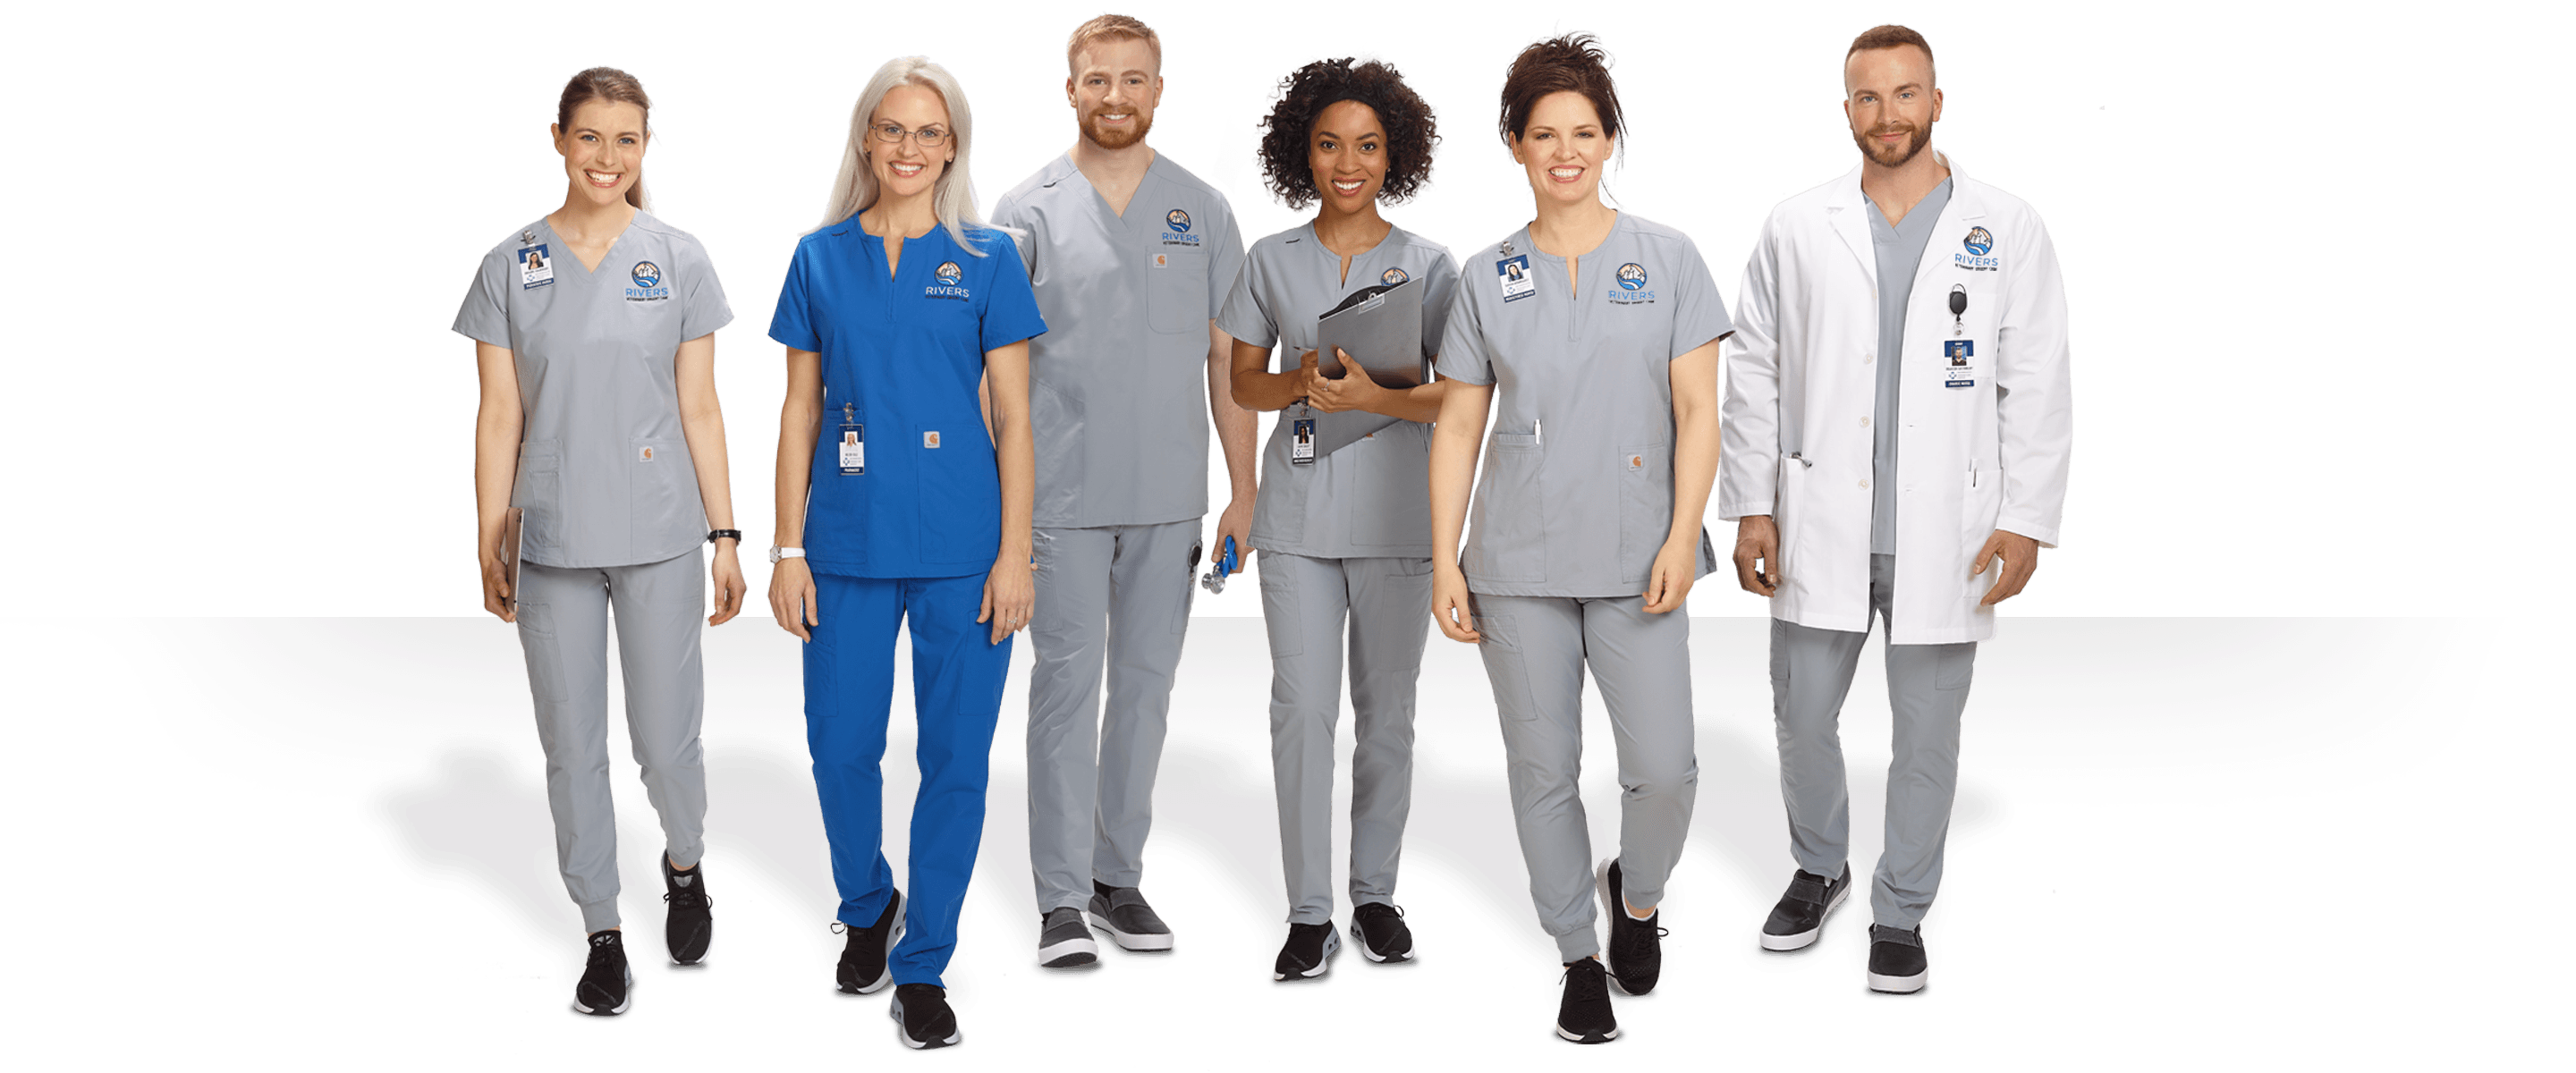 TheRightScrubs-Scrubs-for-Healthcare-Groups